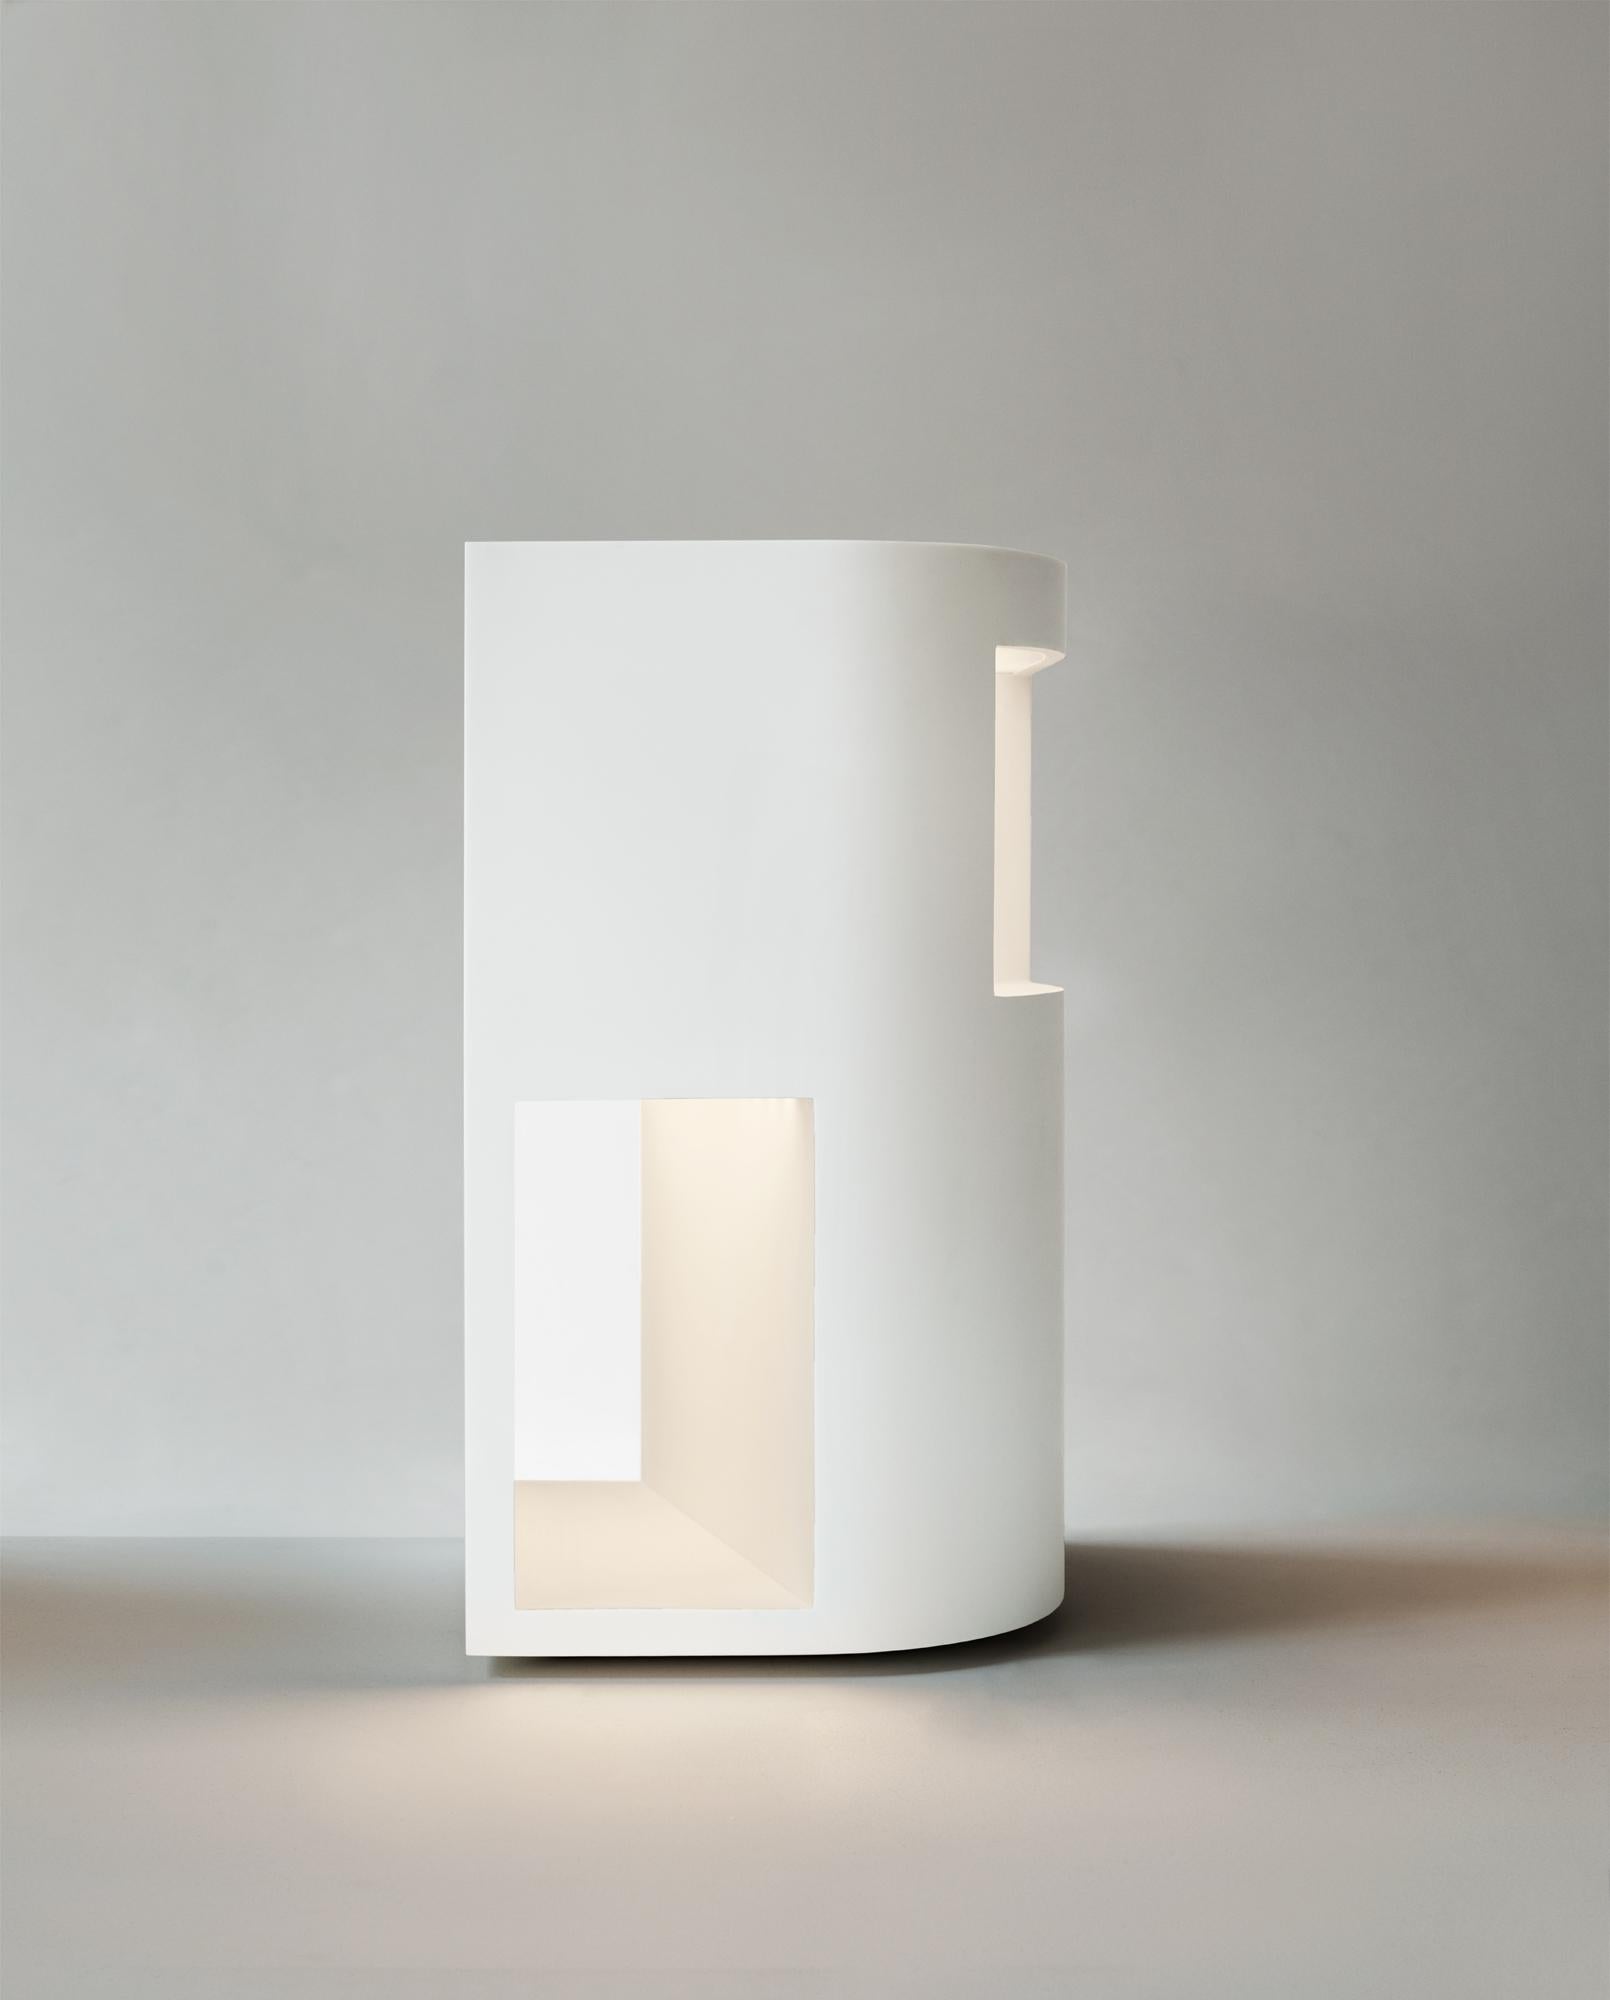 Part of the Fire Island Series. Three functions: end table, sculpture, and floor lamp. The series is inspired by different perspectives of early iconic homes on Fire Island, Long Island and Connecticut designed by Richard and other seminal